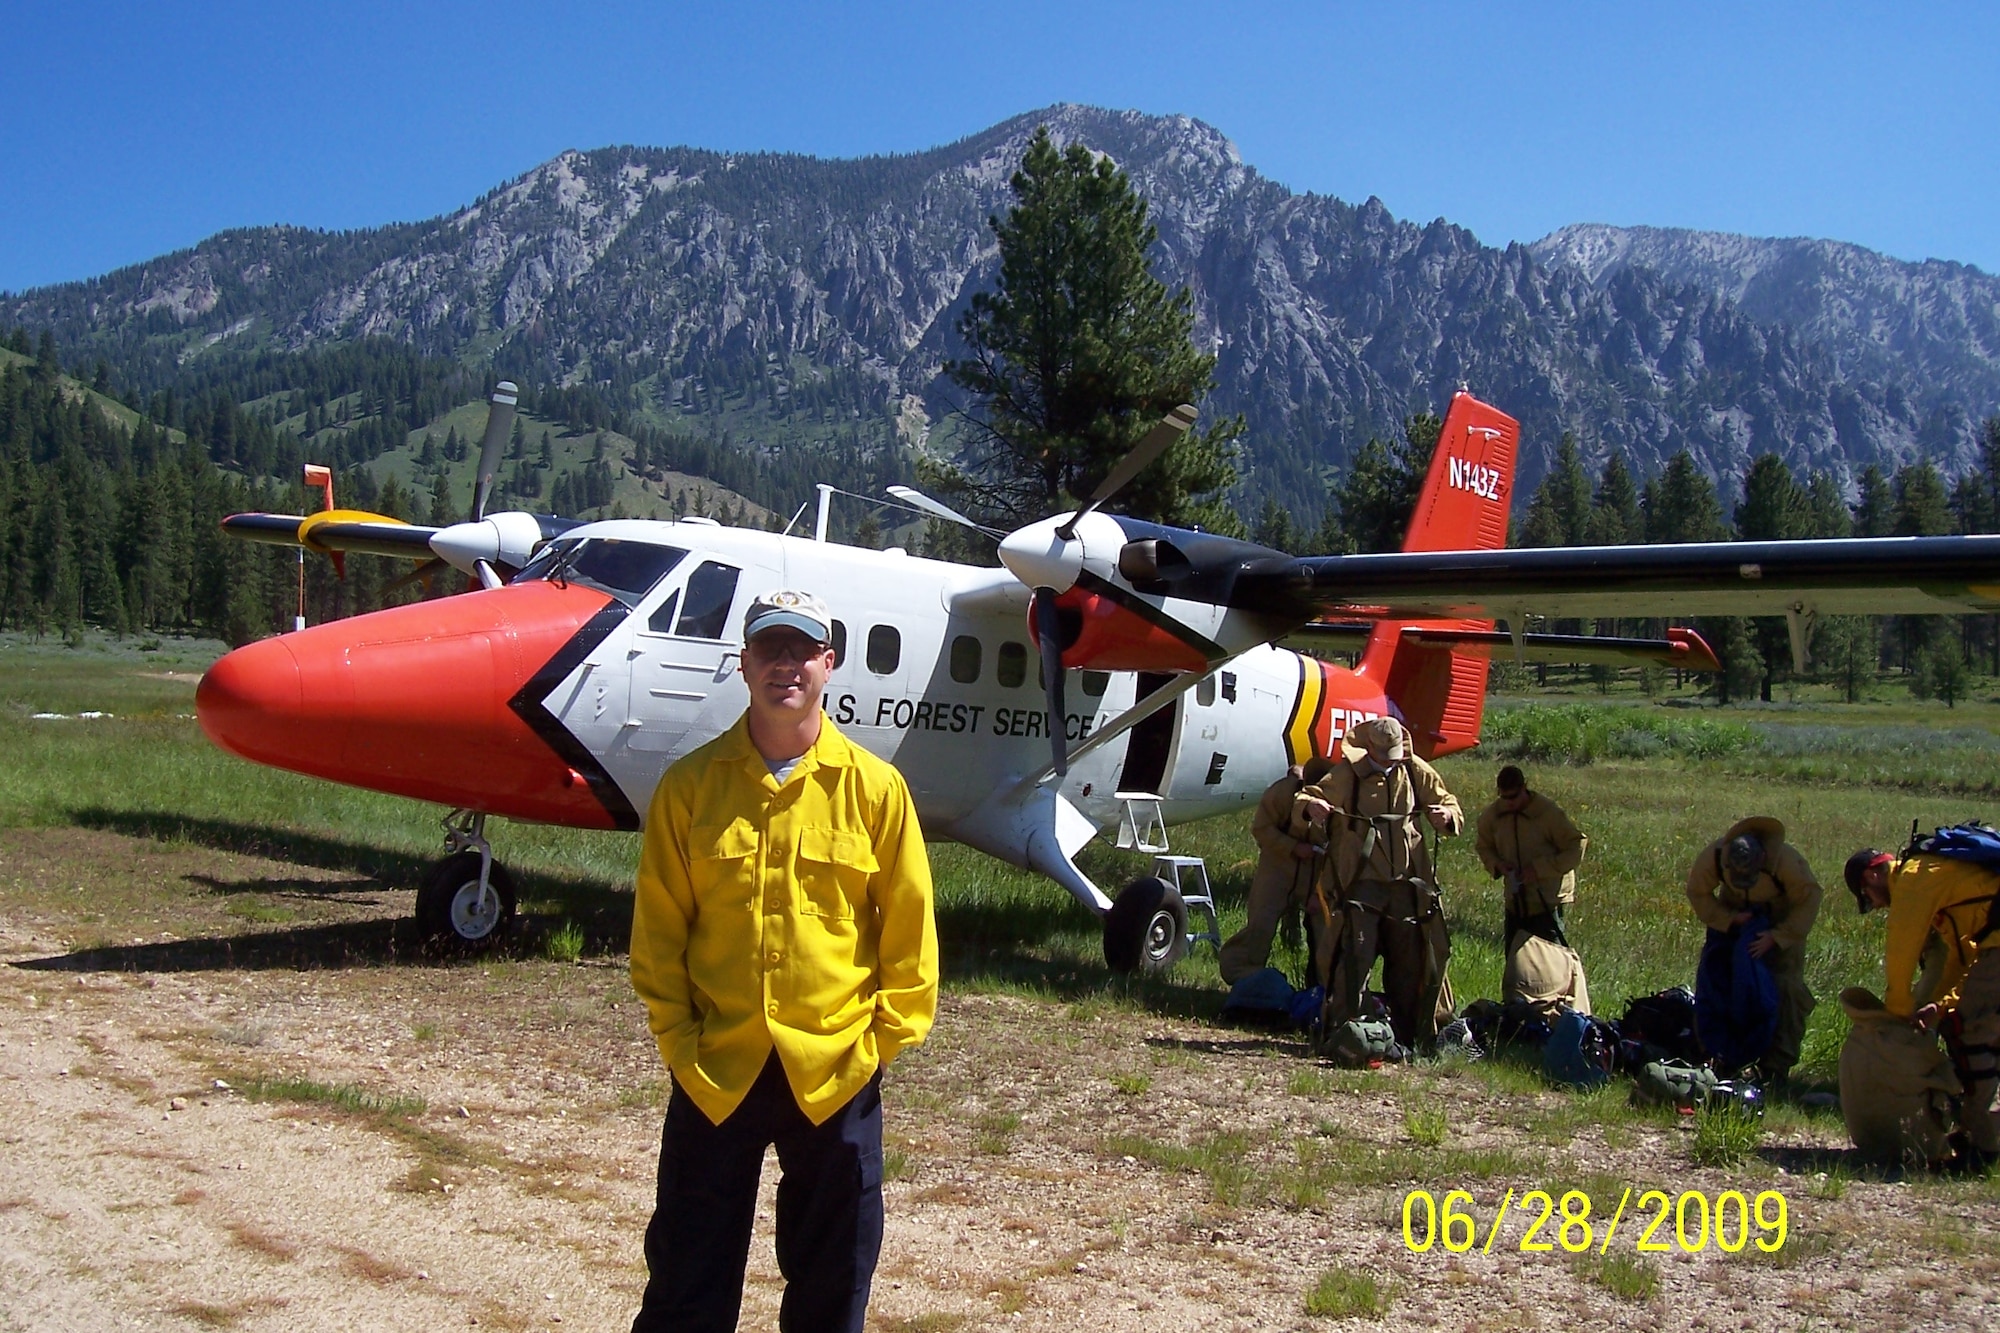 Col. Paul "Buster" Delmonte, the Emergency Preparedness Liaison Officer for Utah, is a lead plane pilot for the U.S. National Forest Service. He is pictured here with one of his aircraft, a DHC-6 Twin Otter.